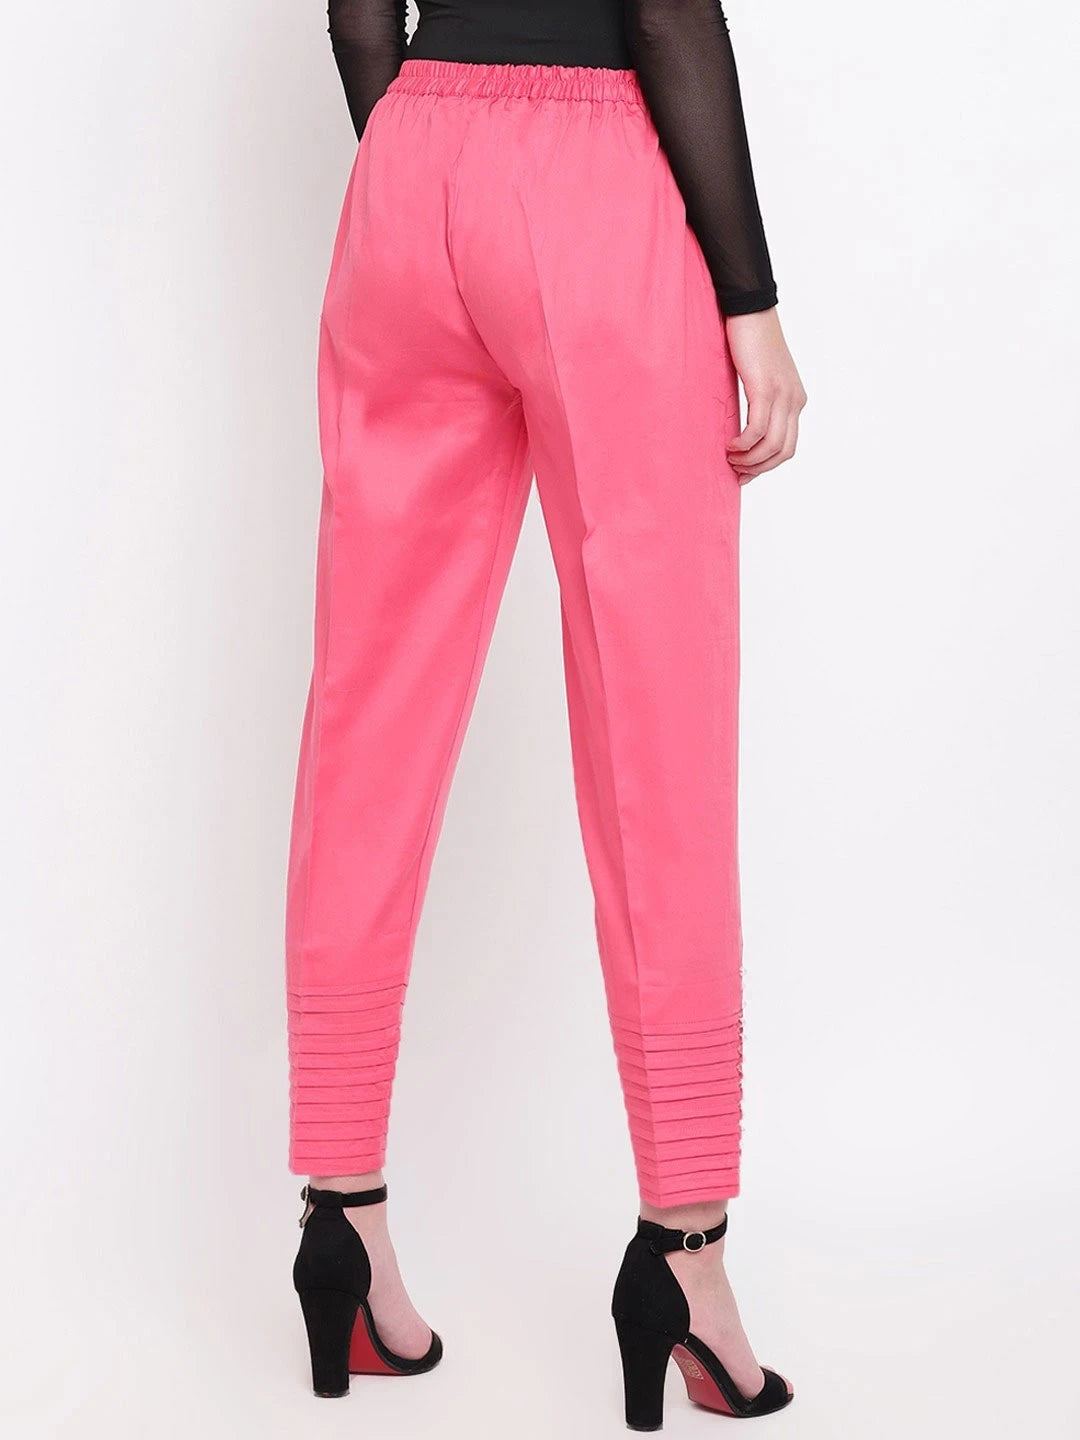 The model in the image is wearing Light Pink Pintex Silk Women's Pant from Alice Milan. Crafted with the finest materials and impeccable attention to detail, the Women's Pant looks premium, trendy, luxurious and offers unparalleled comfort. It’s a perfect clothing option for loungewear, resort wear, party wear or for an airport look. The woman in the image looks happy, and confident with her style statement putting a happy smile on her face.